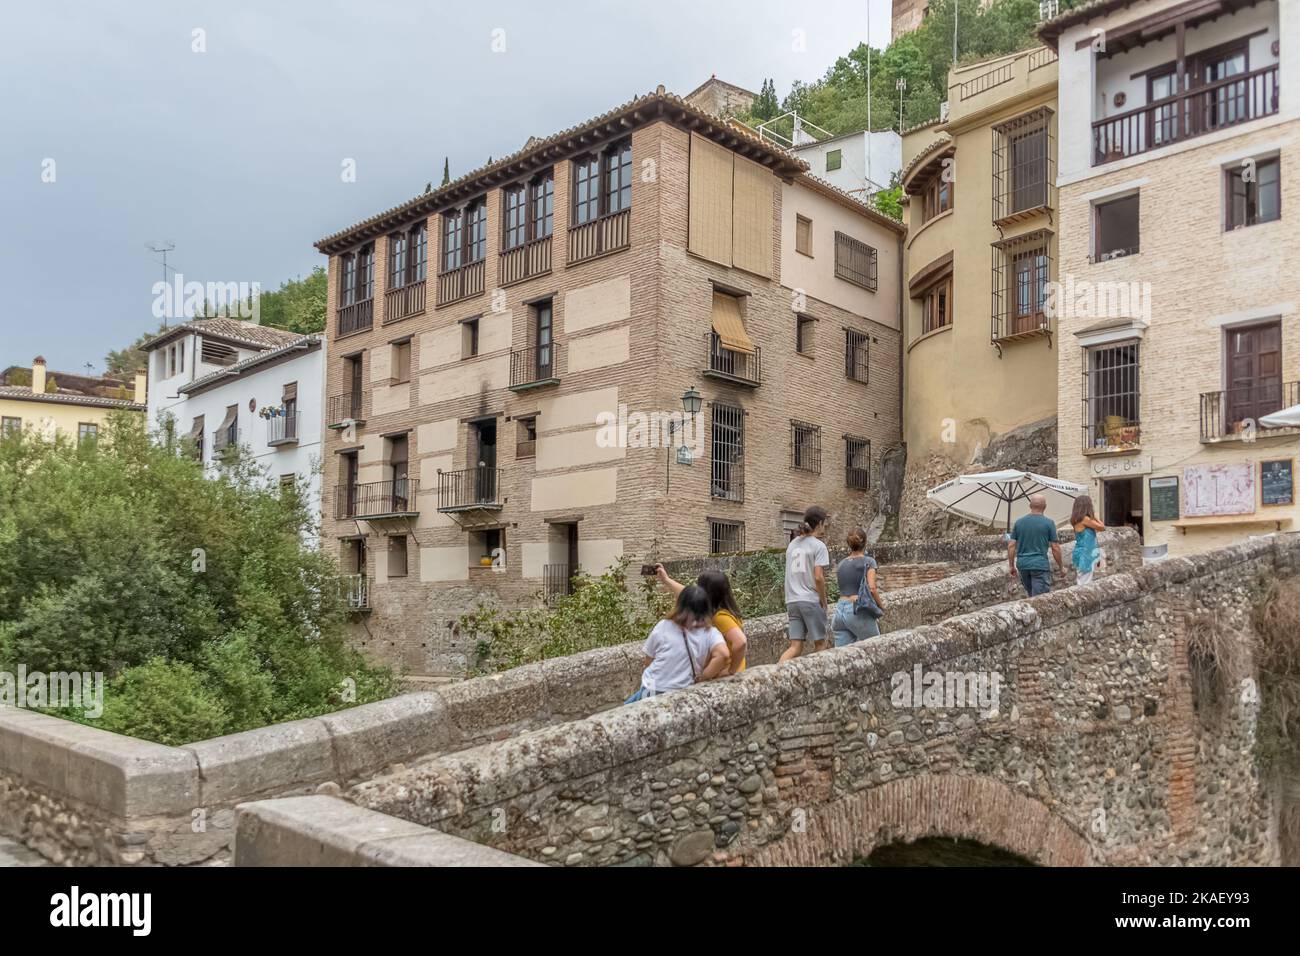 Granada Spain - 09 14 2021: View at the Darro Street, Paseo de los tristes, cabrera bridge, touristic people visiting iconic and picturesque street, A Stock Photo